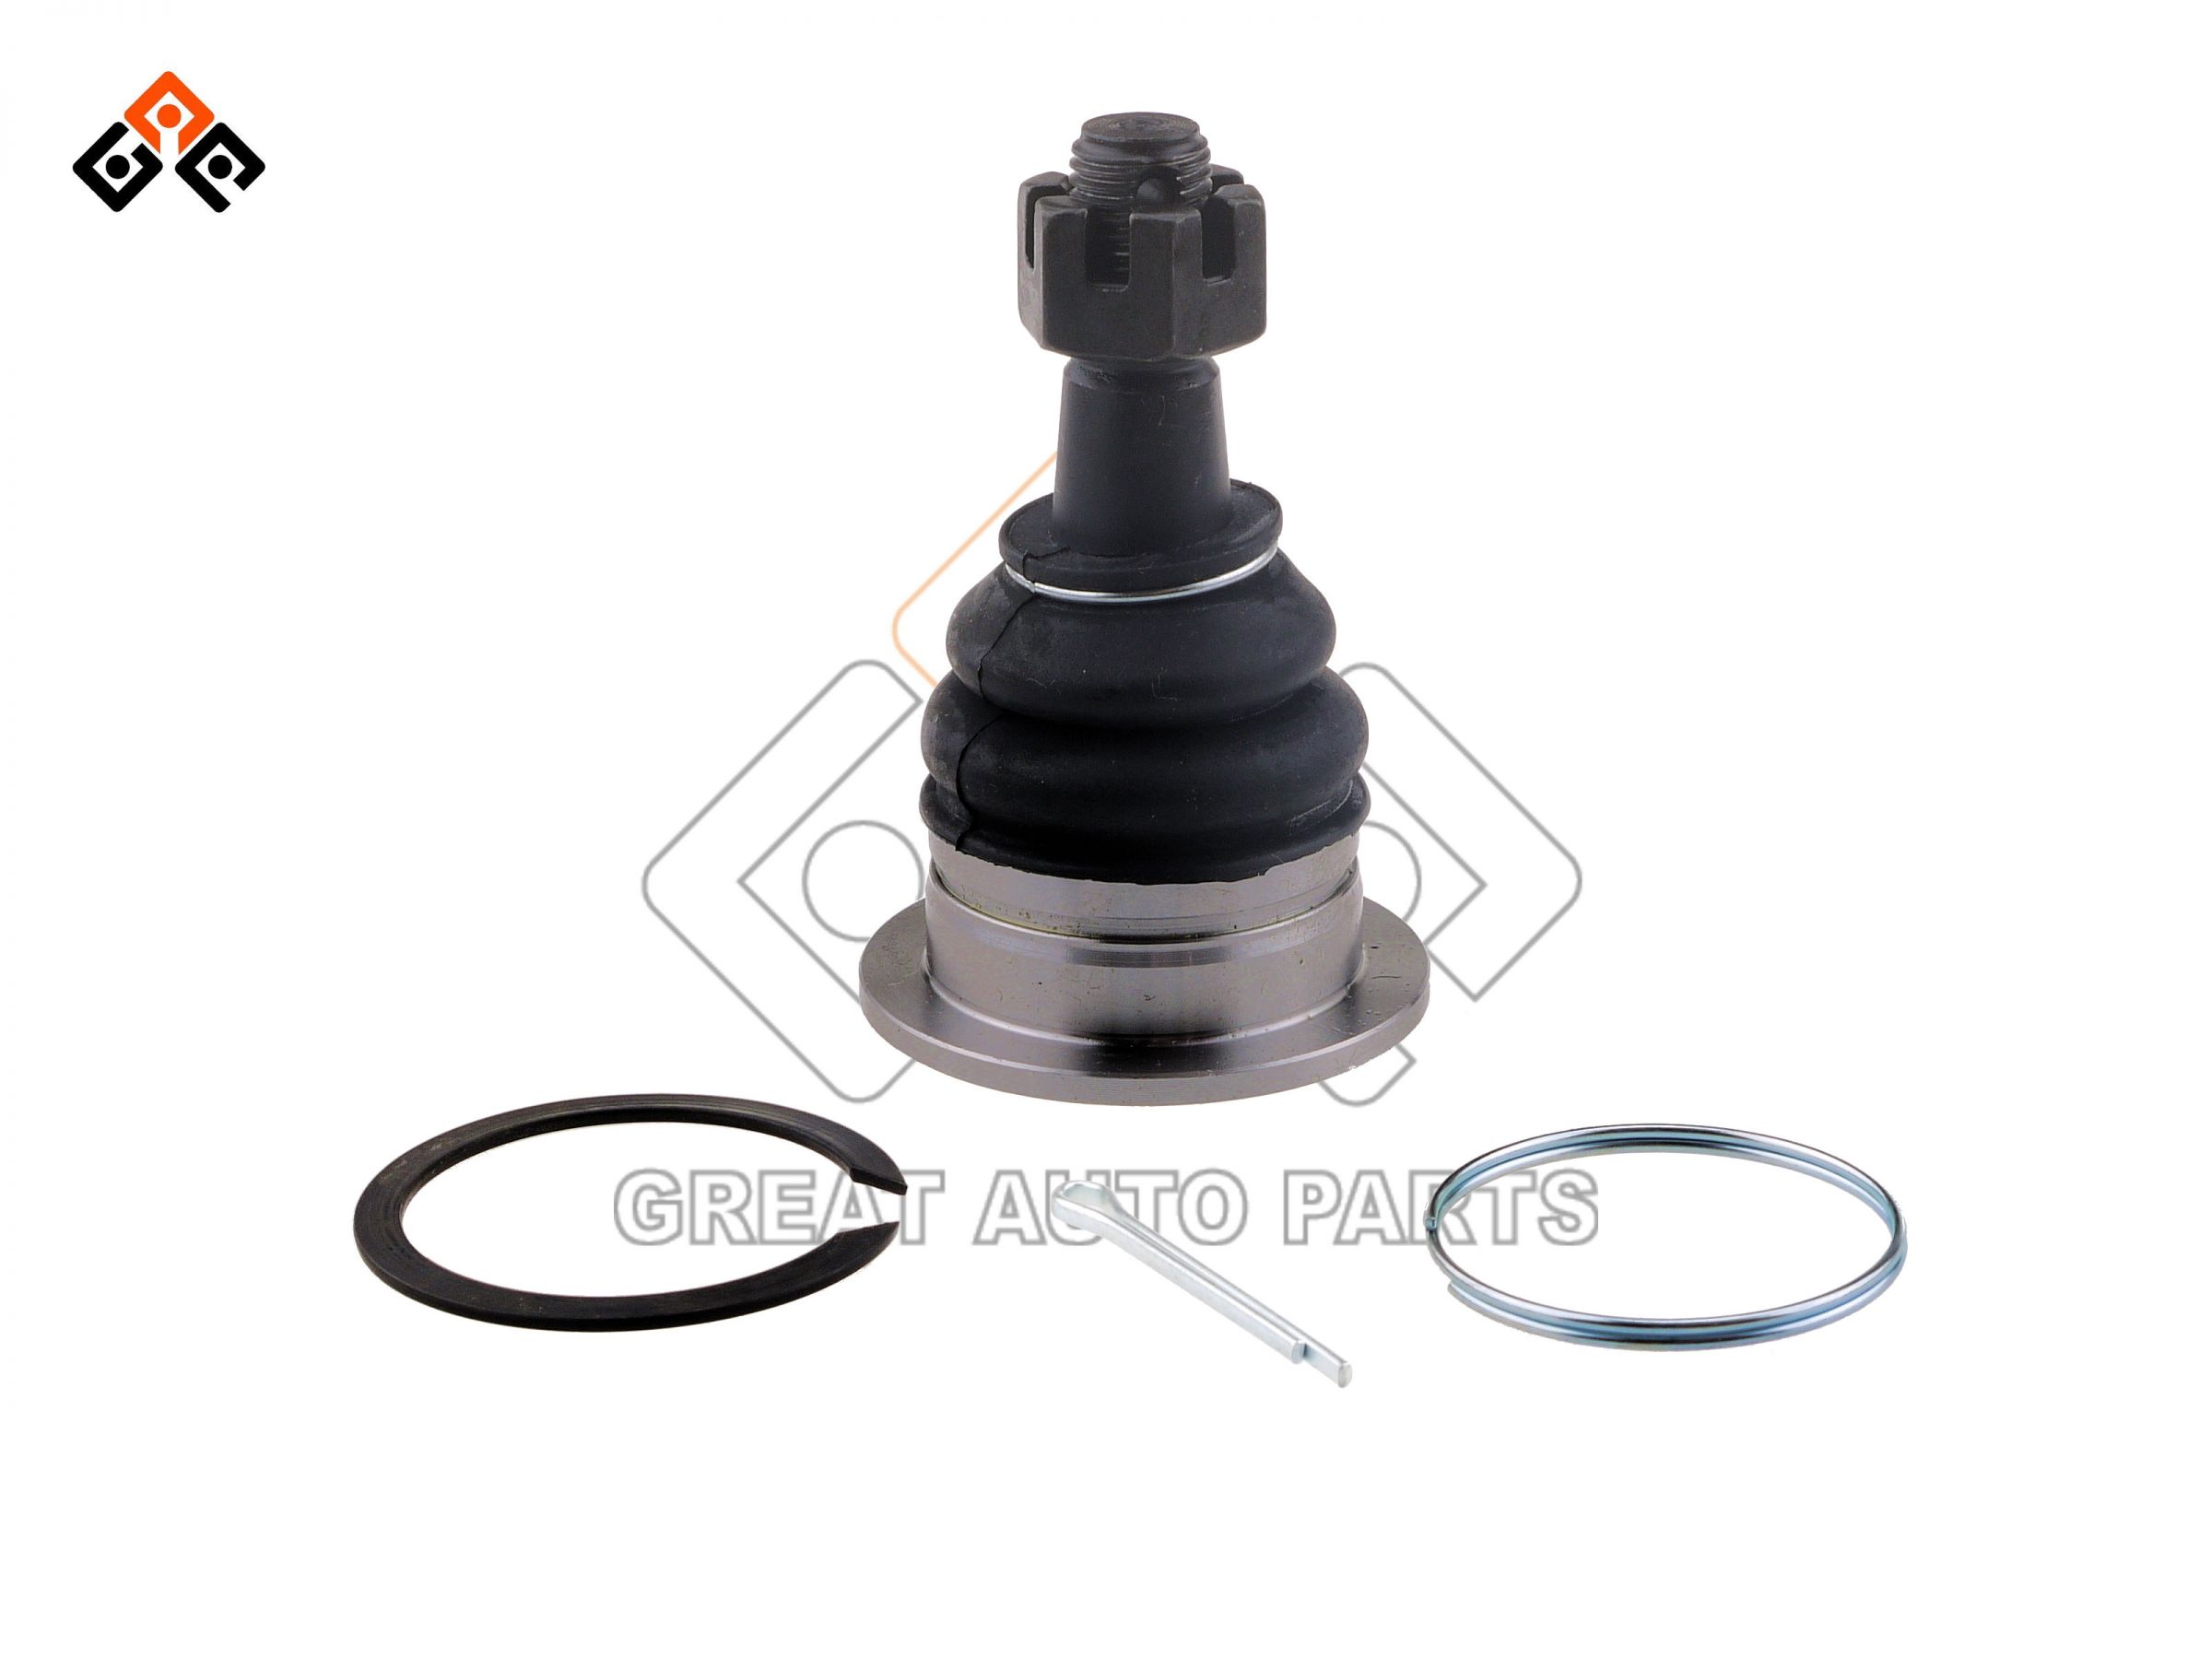 Ball joints are vital components of your car's suspension system.